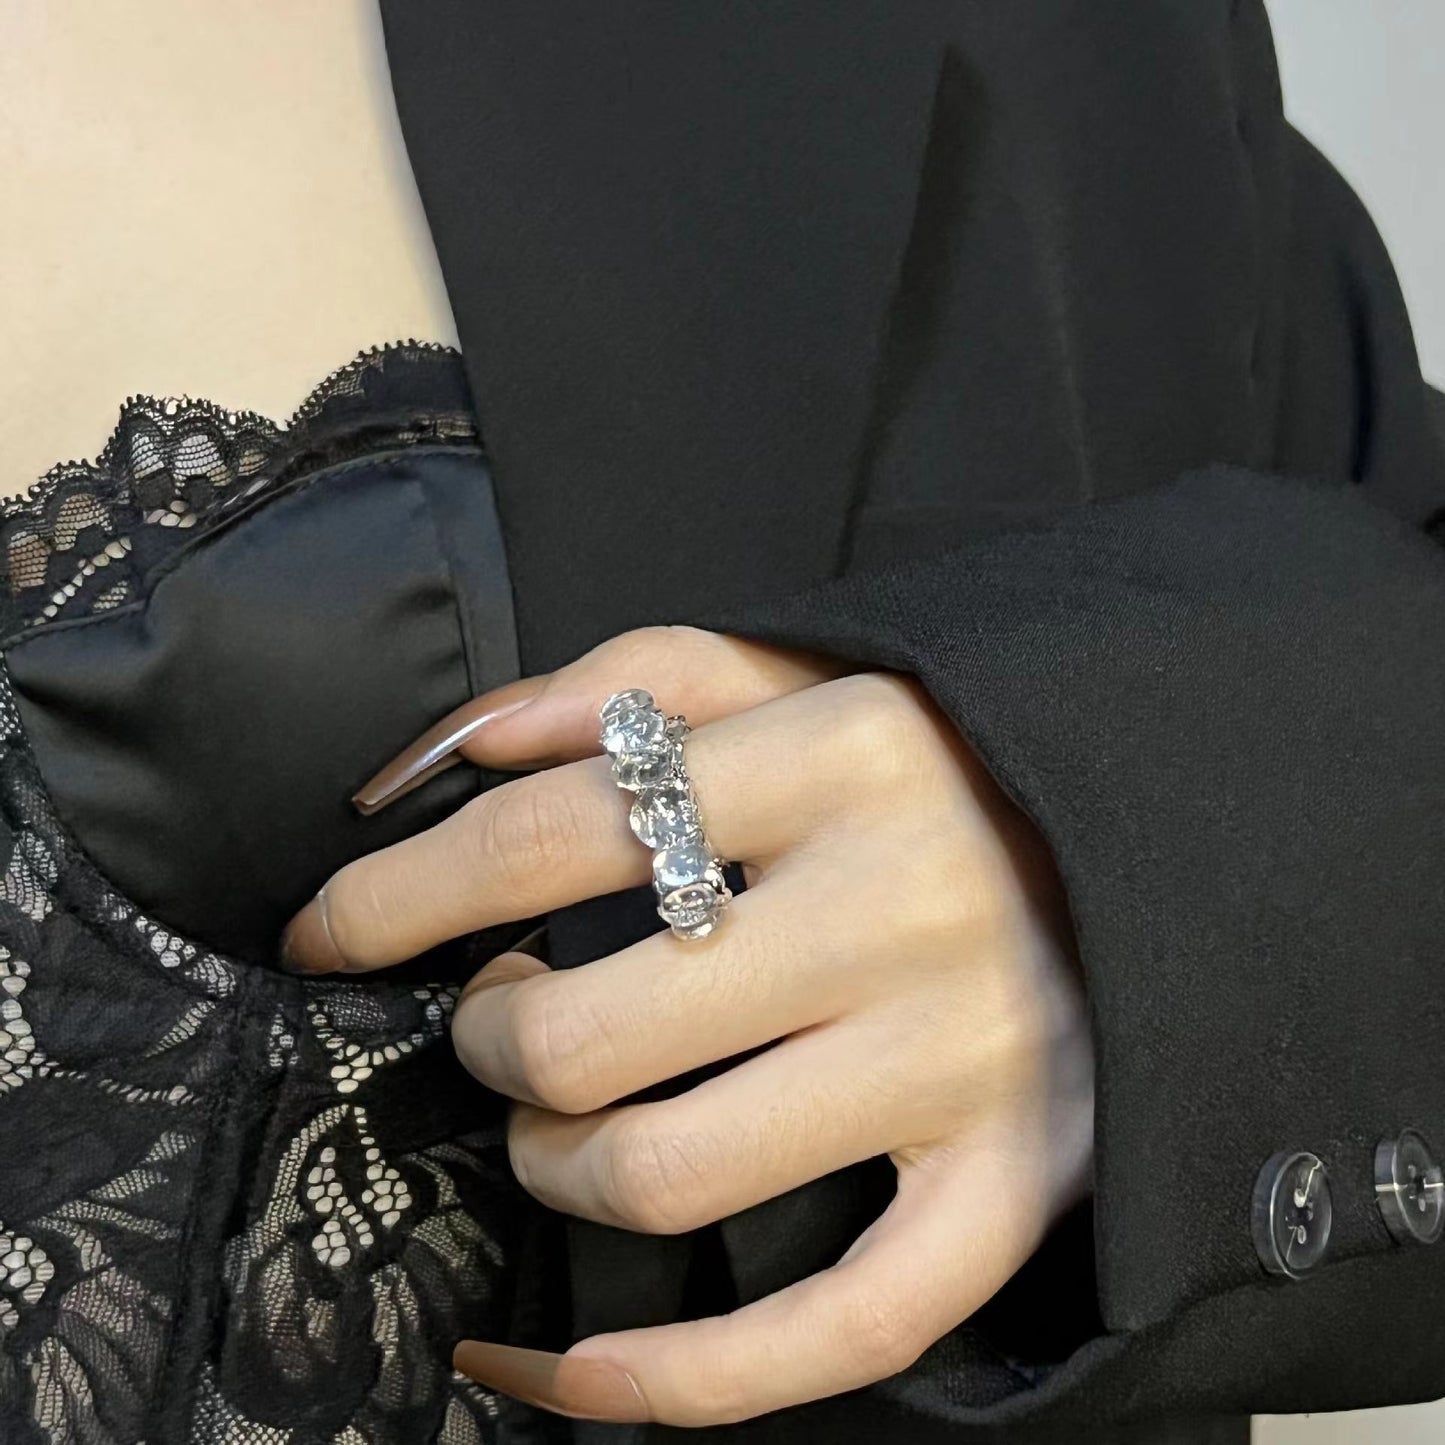 Metal Pleated Irregular Ring for Women's Fashion INS. Cool and Elegant Design for a Small Group. Index Finger Ring Opening